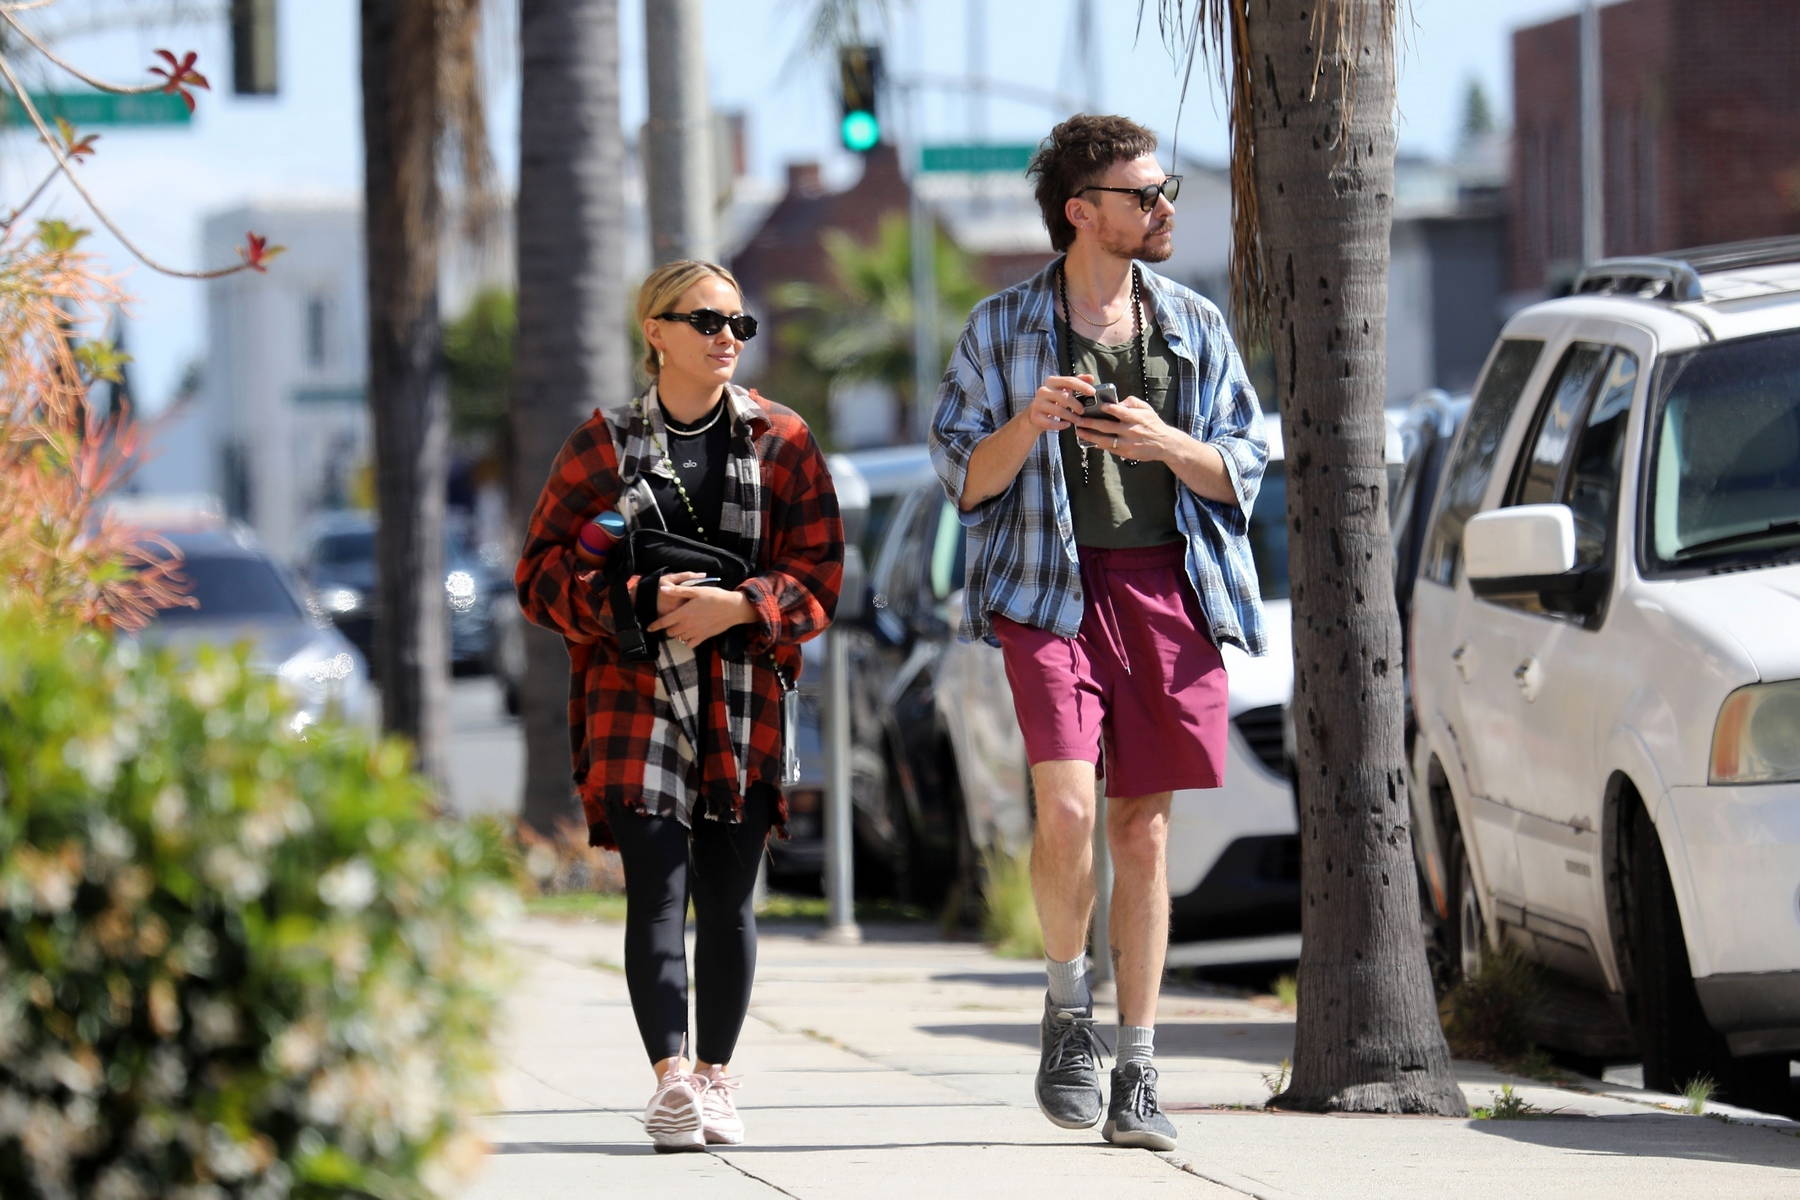 Hilary Duff wears a flannel shirt and leggings while stepping out